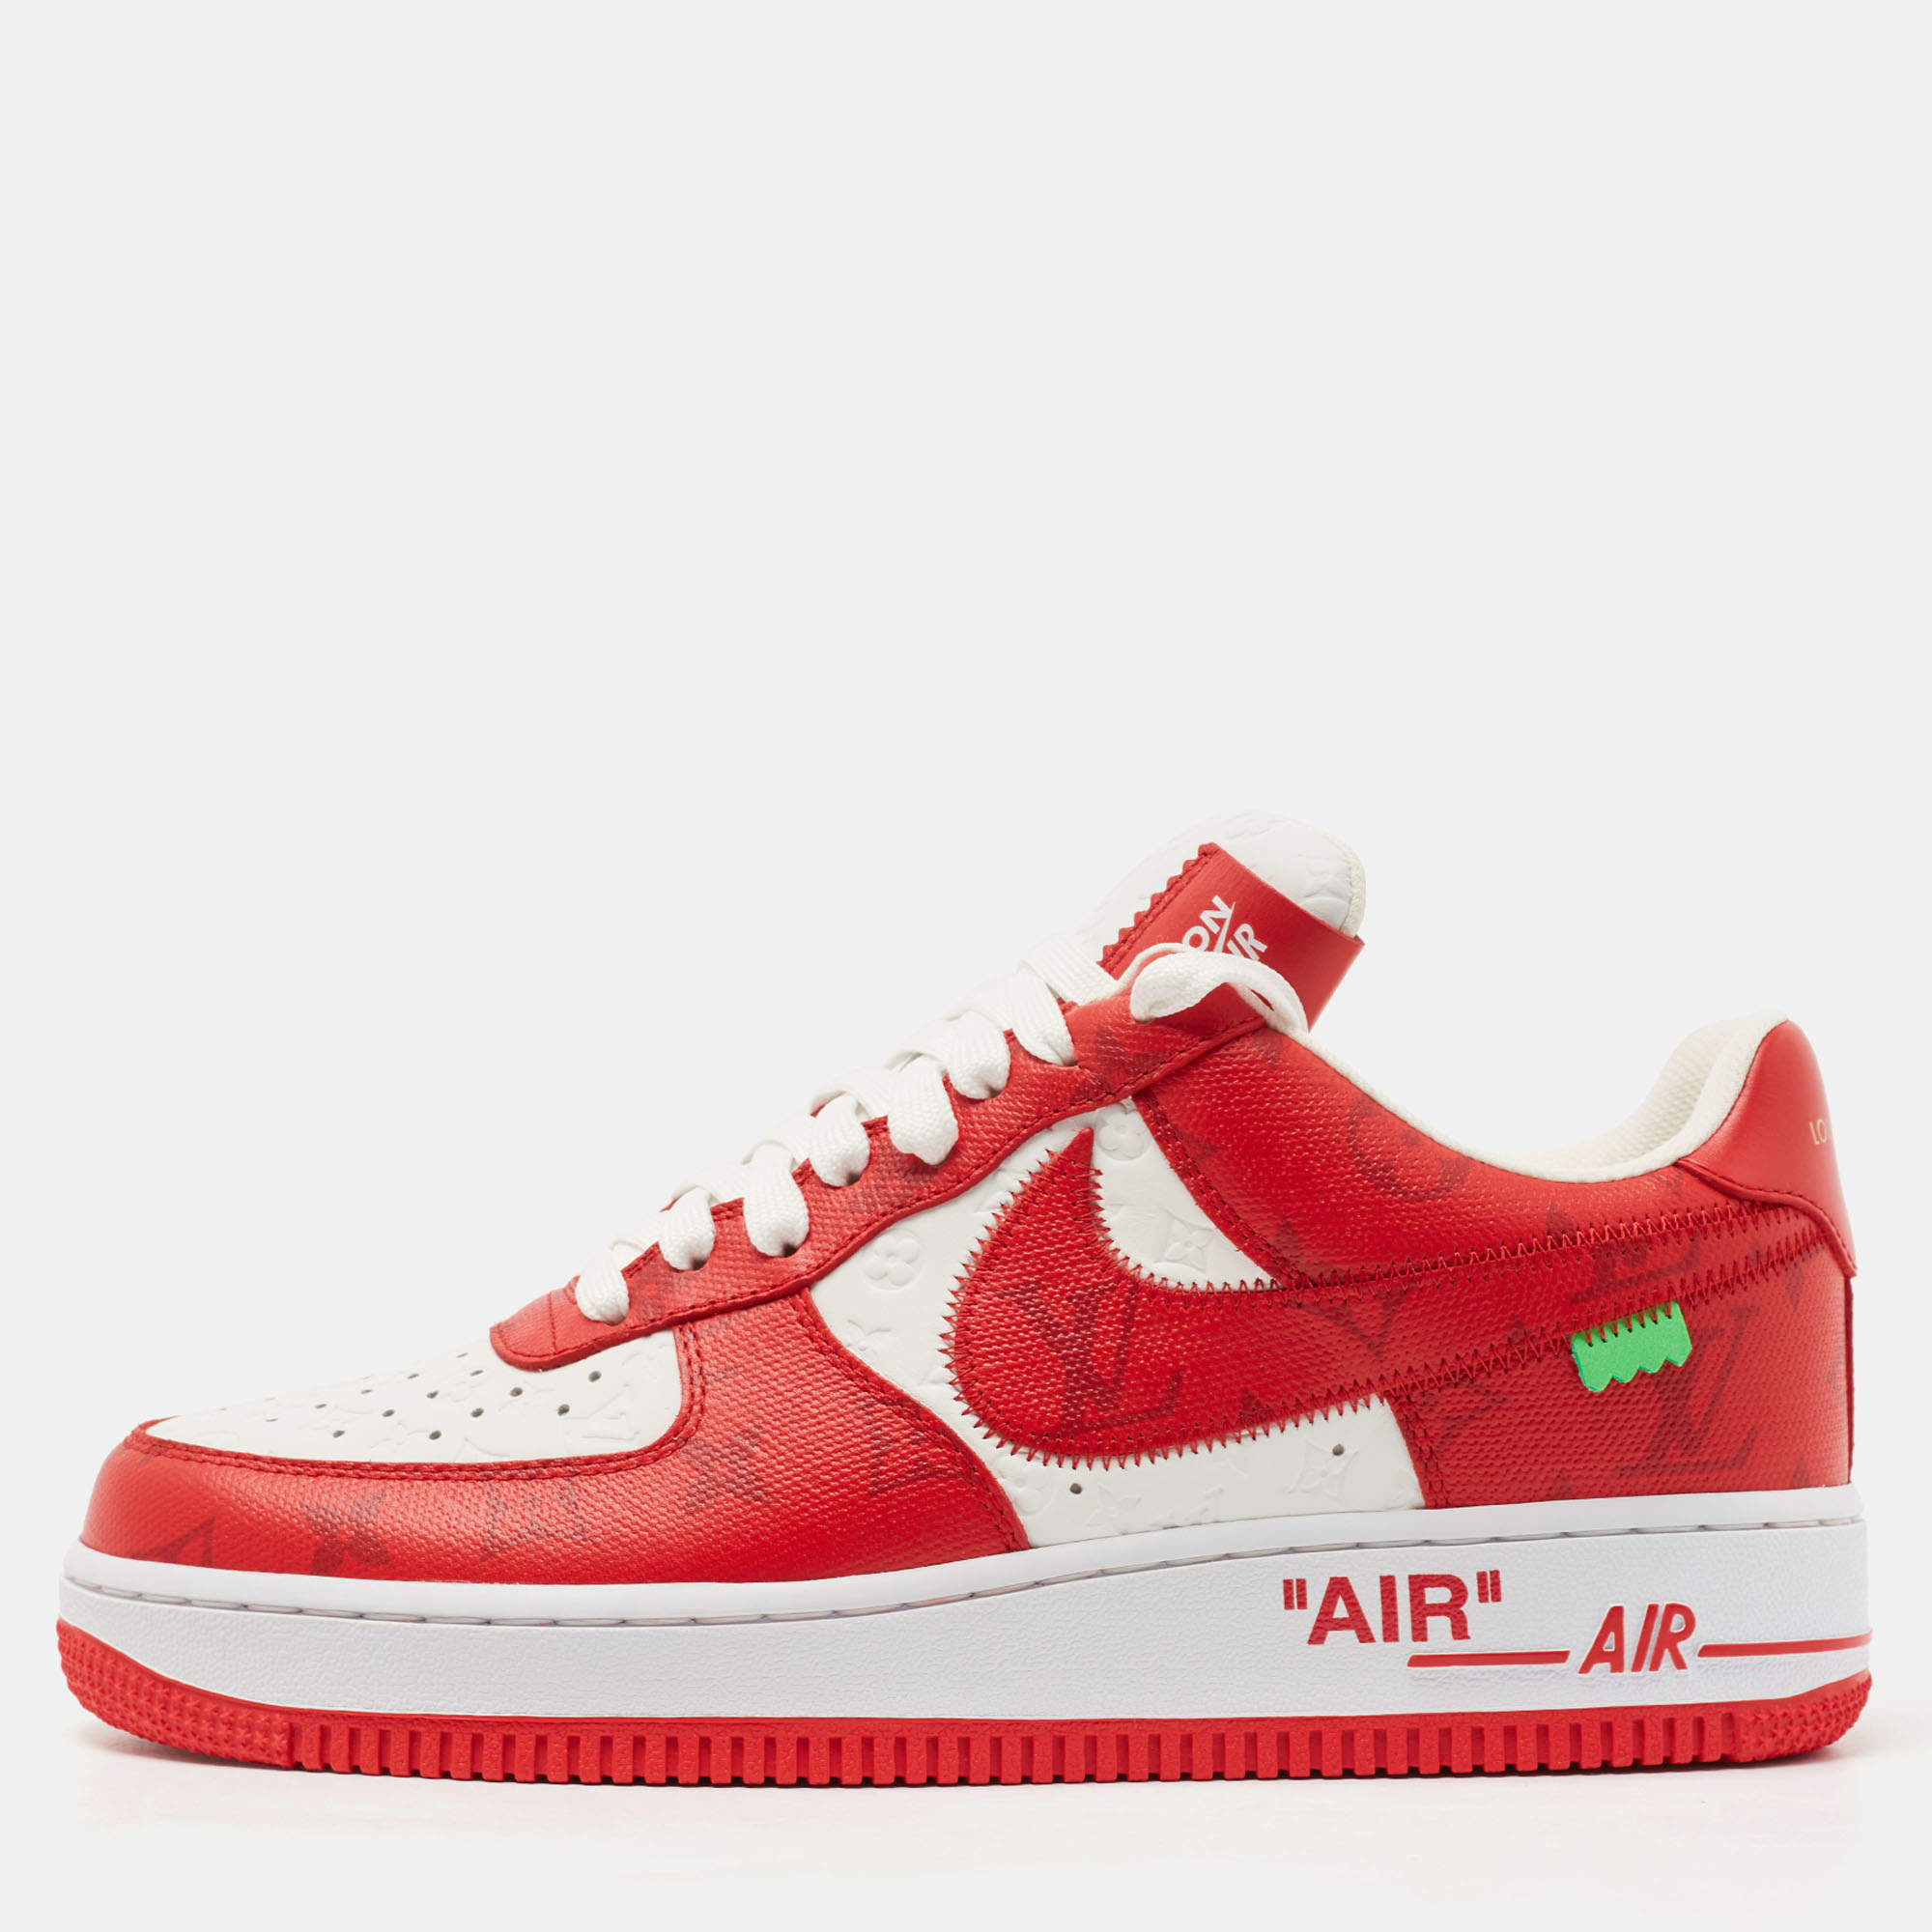 Louis Vuitton x Nike Red/White and Leather Air Force 1 Sneakers Size 41 Louis Vuitton | TLC